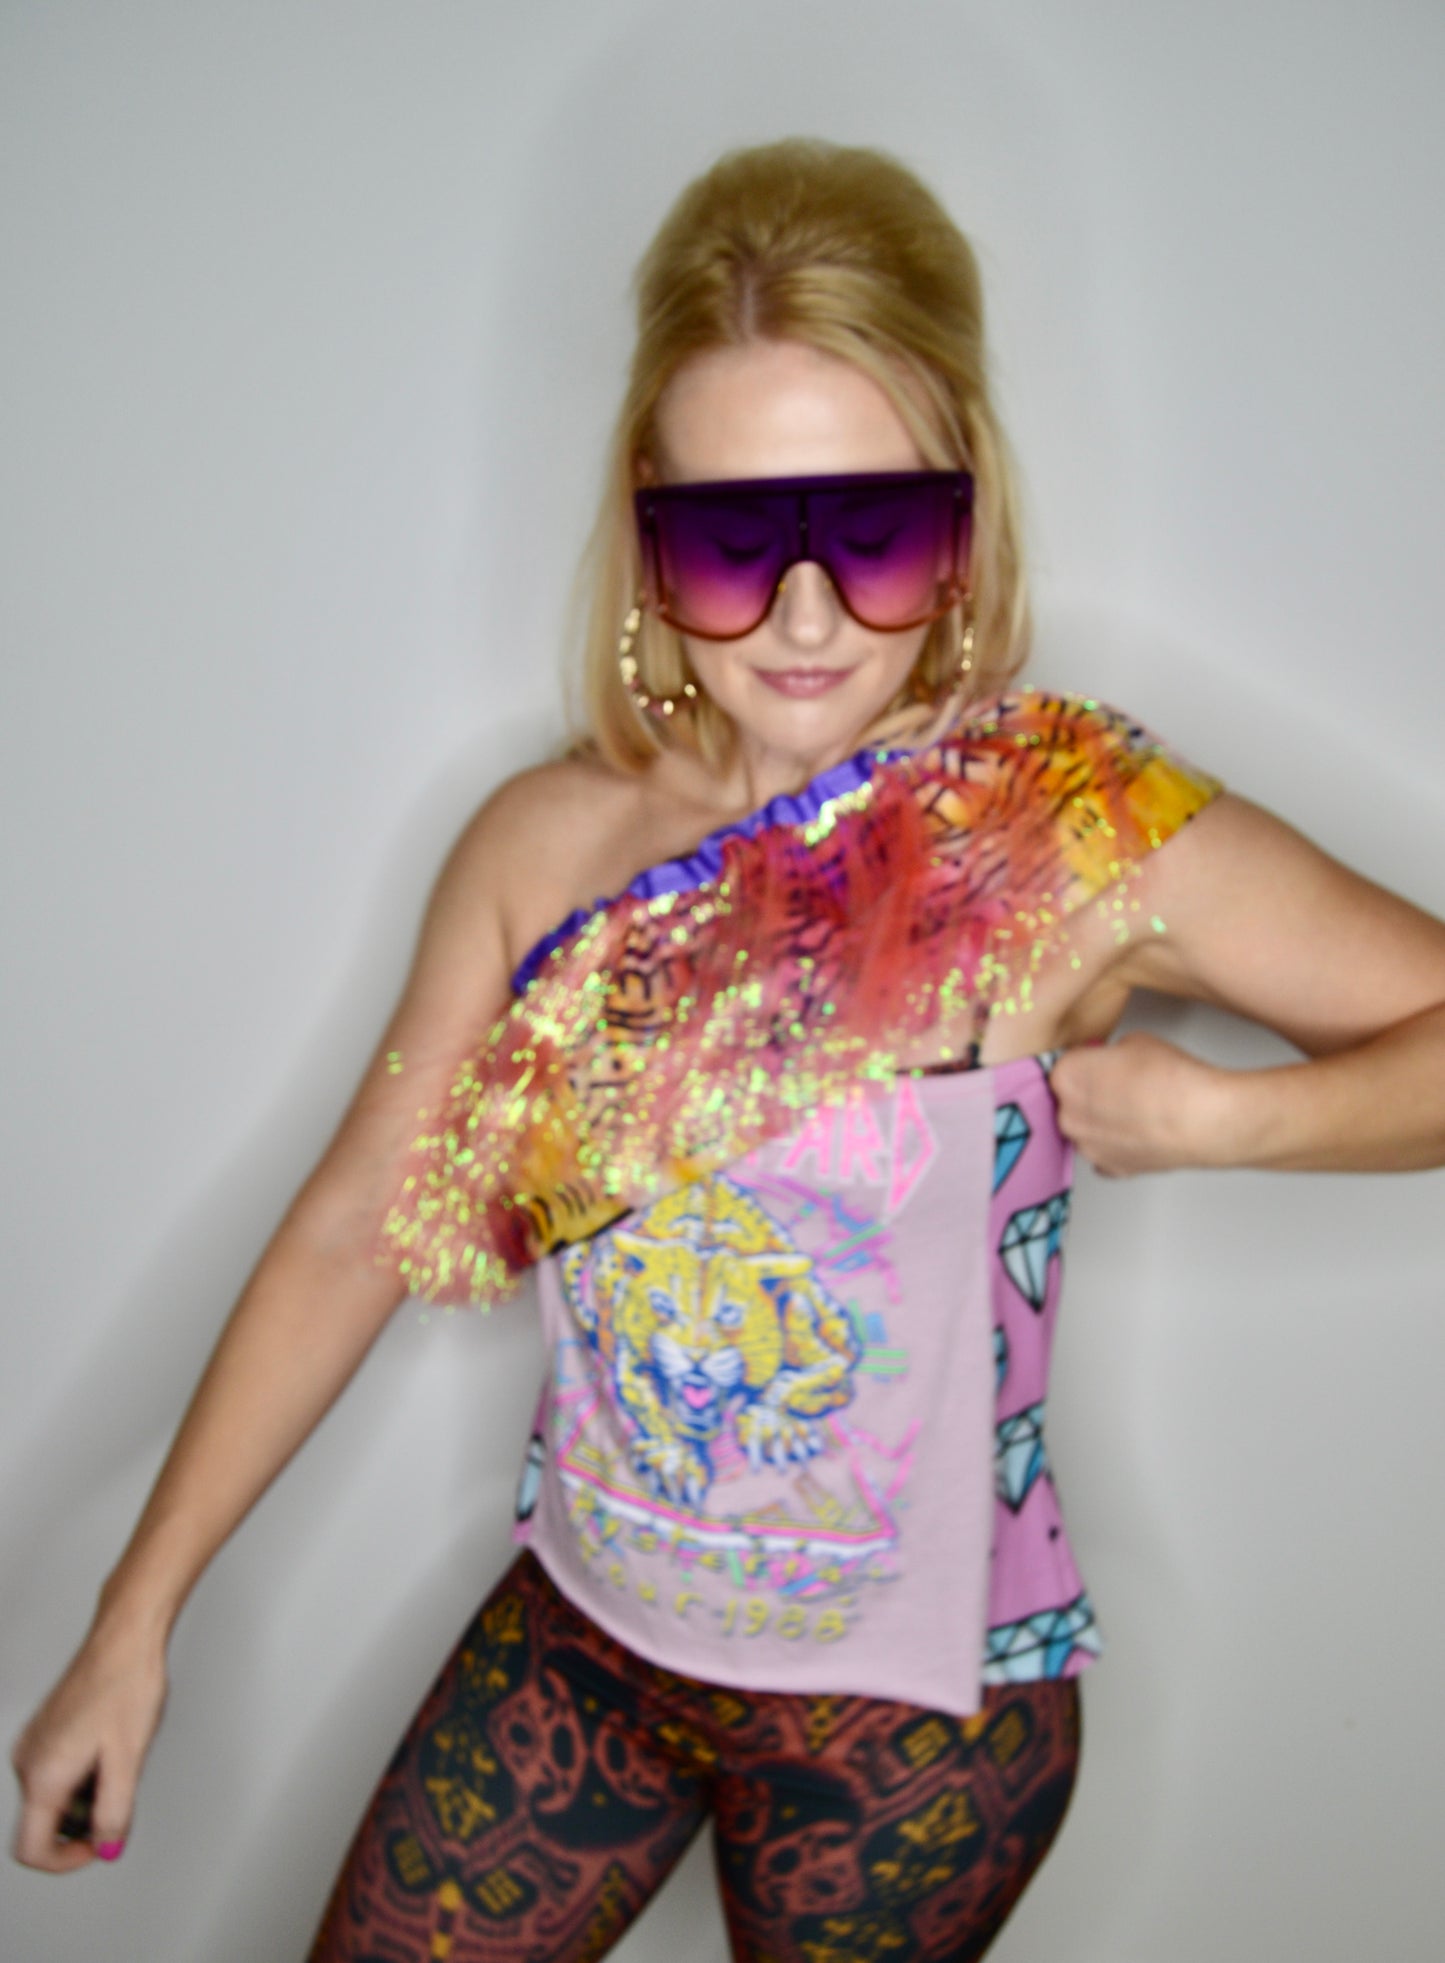 Def Leppard Pink Asymmetrical Ruffle Upcycled Tinsel Top